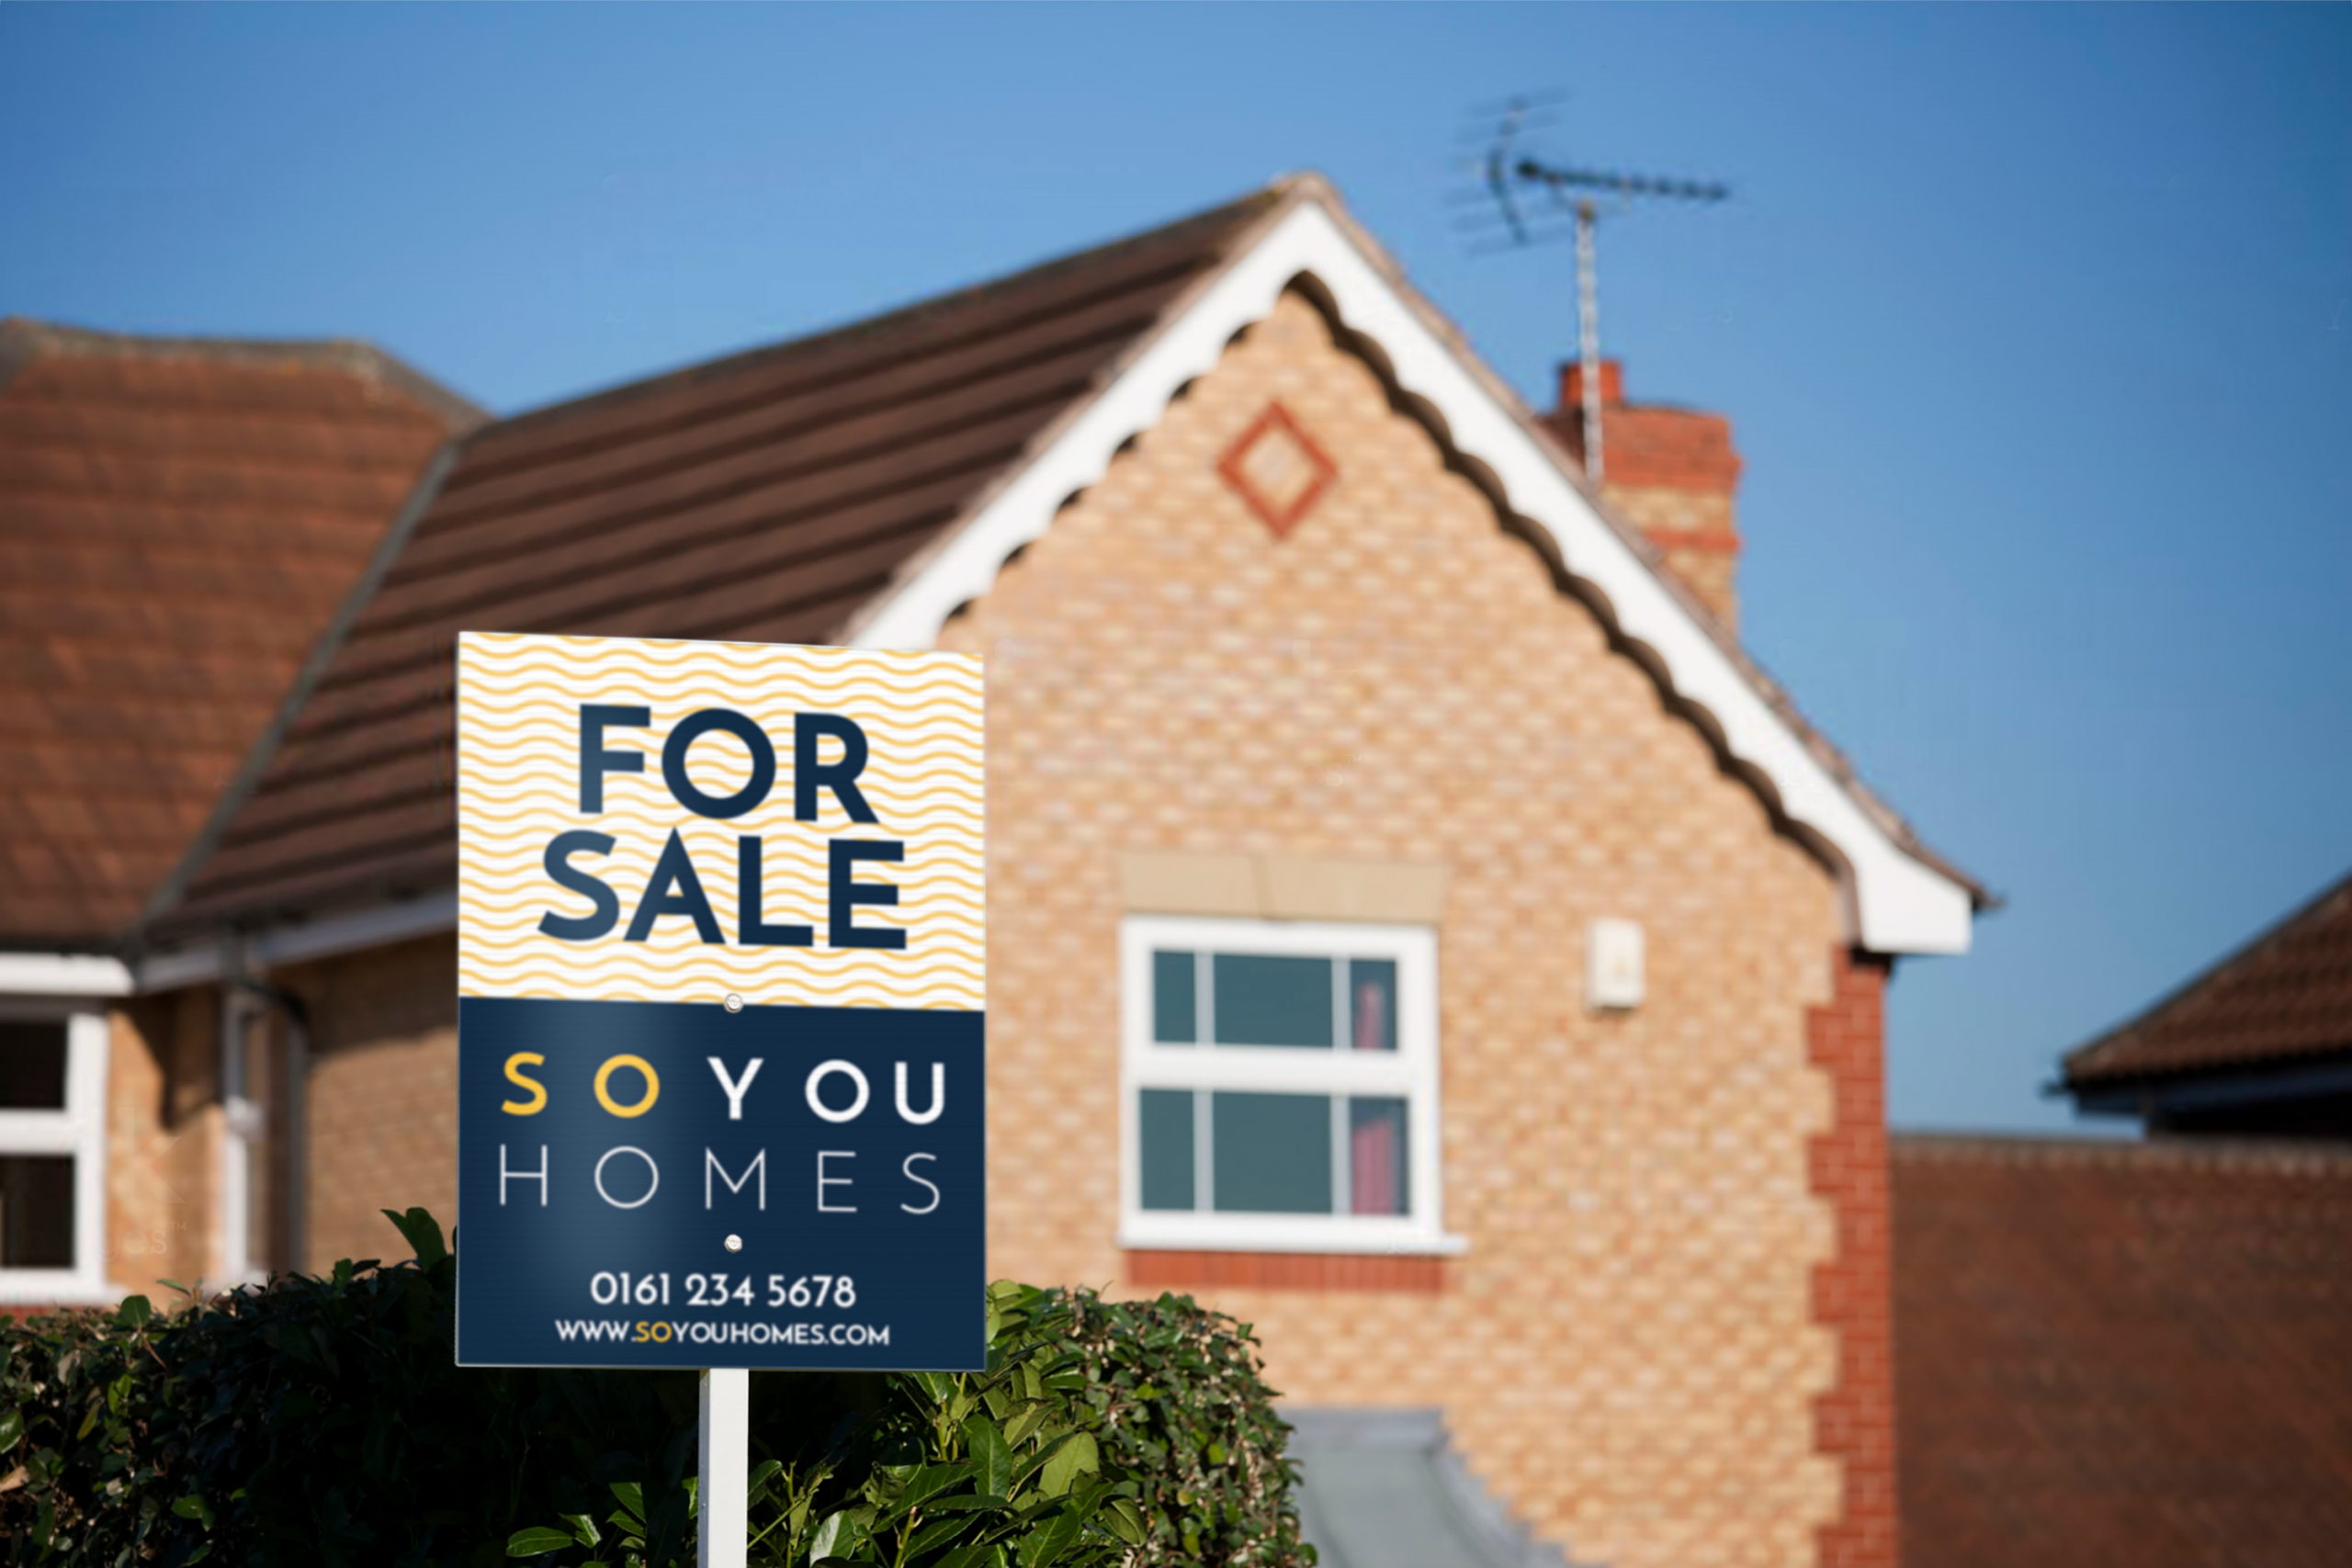 So You Homes For Sale Sign with patterned background, infront of house